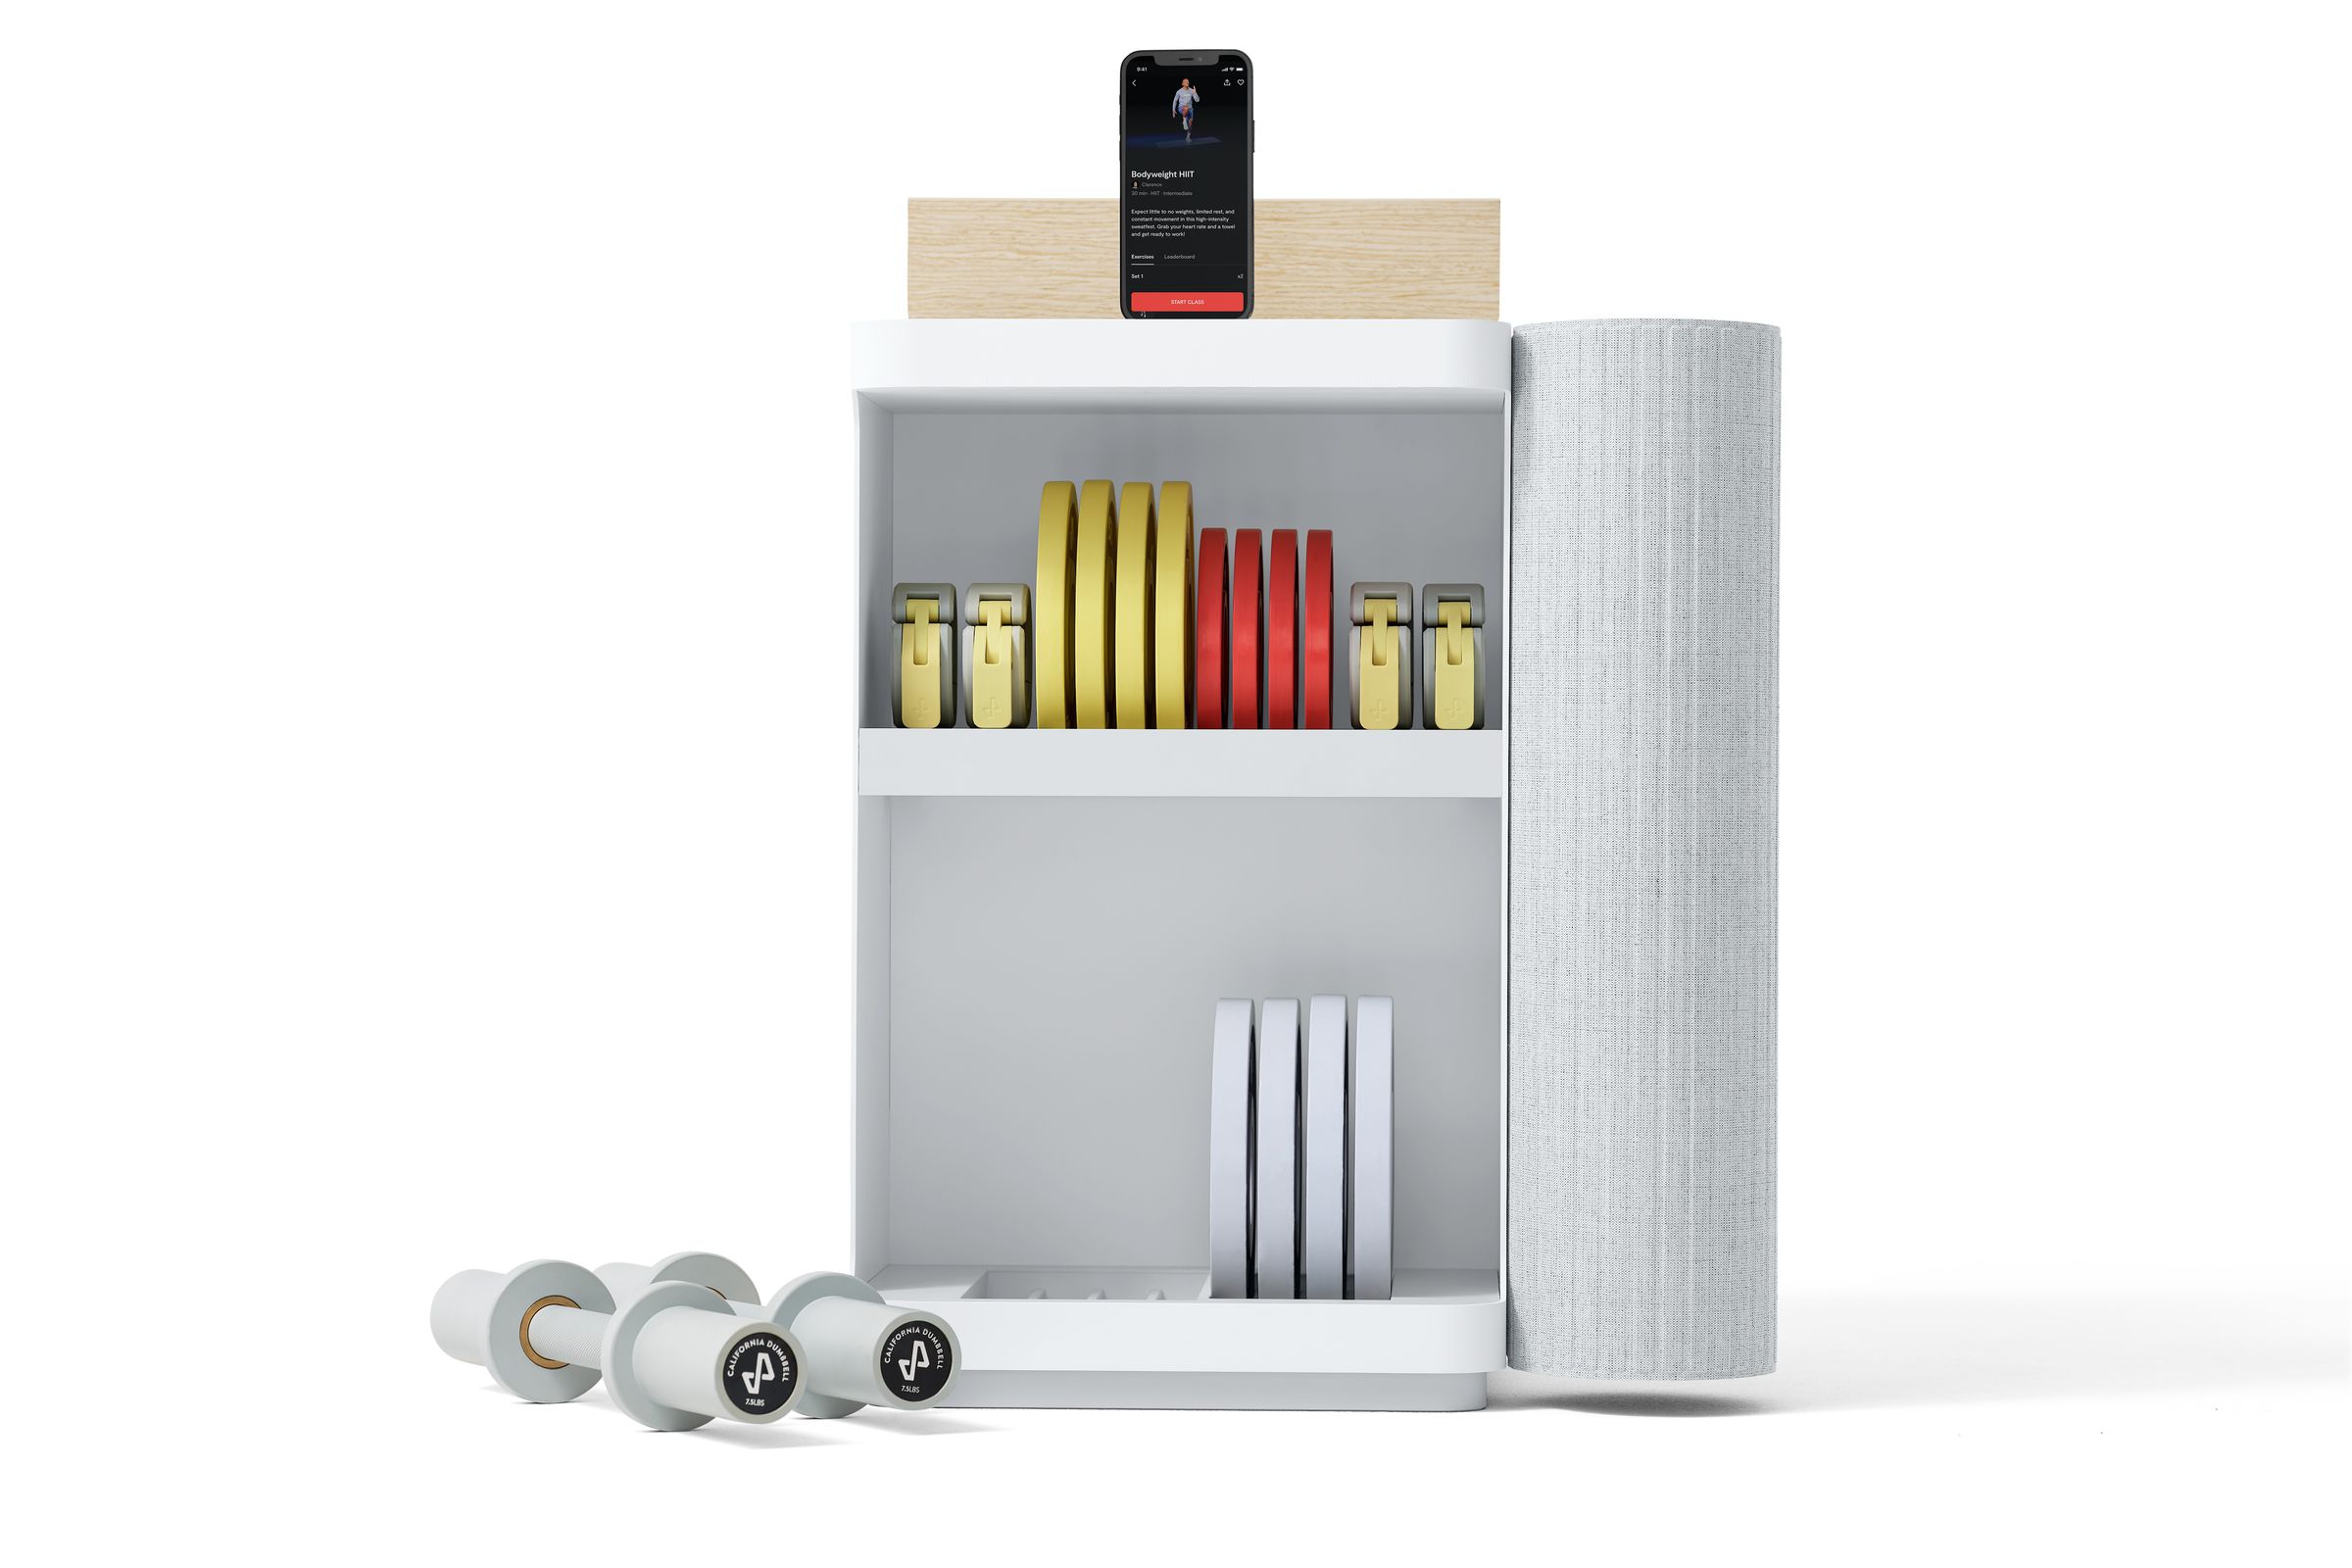 The smart weights come with a cabinet in which to store them.